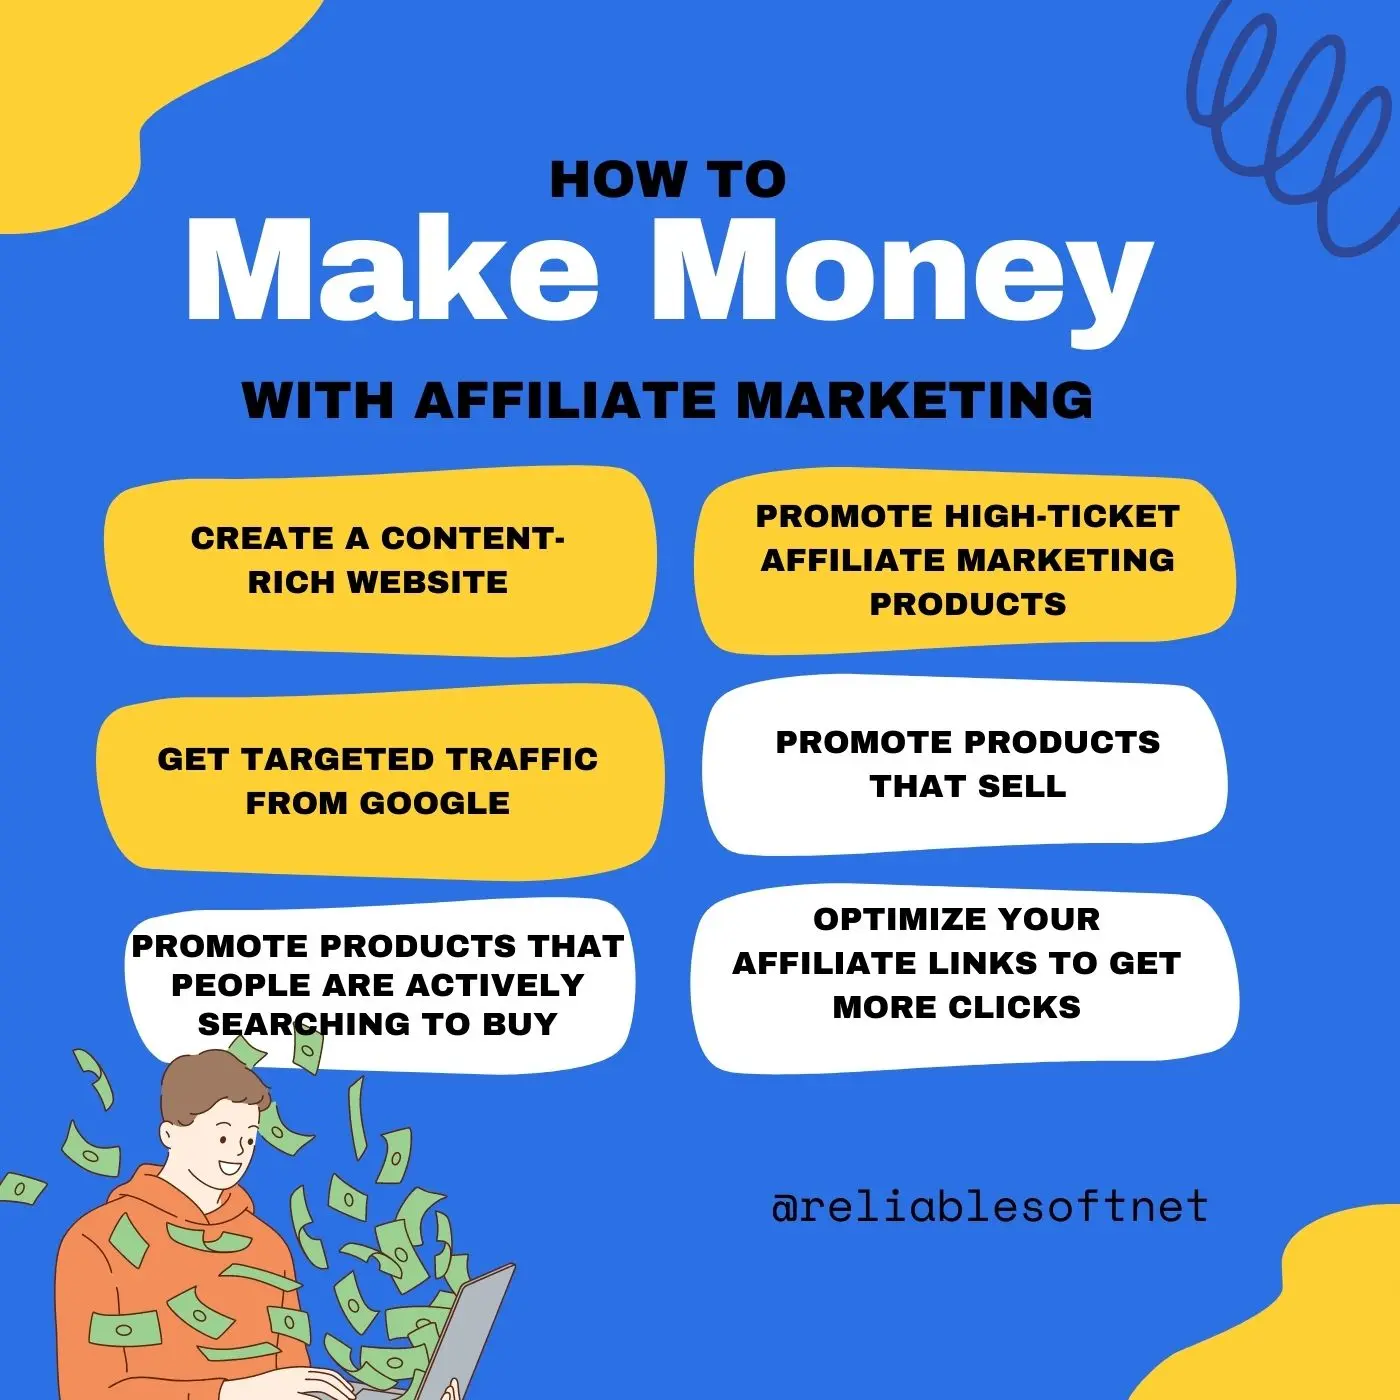 10 Ways to Make Fast Money by Playing Video Games Online - BloggerSpice:  SEO Training and Money Making Strategies